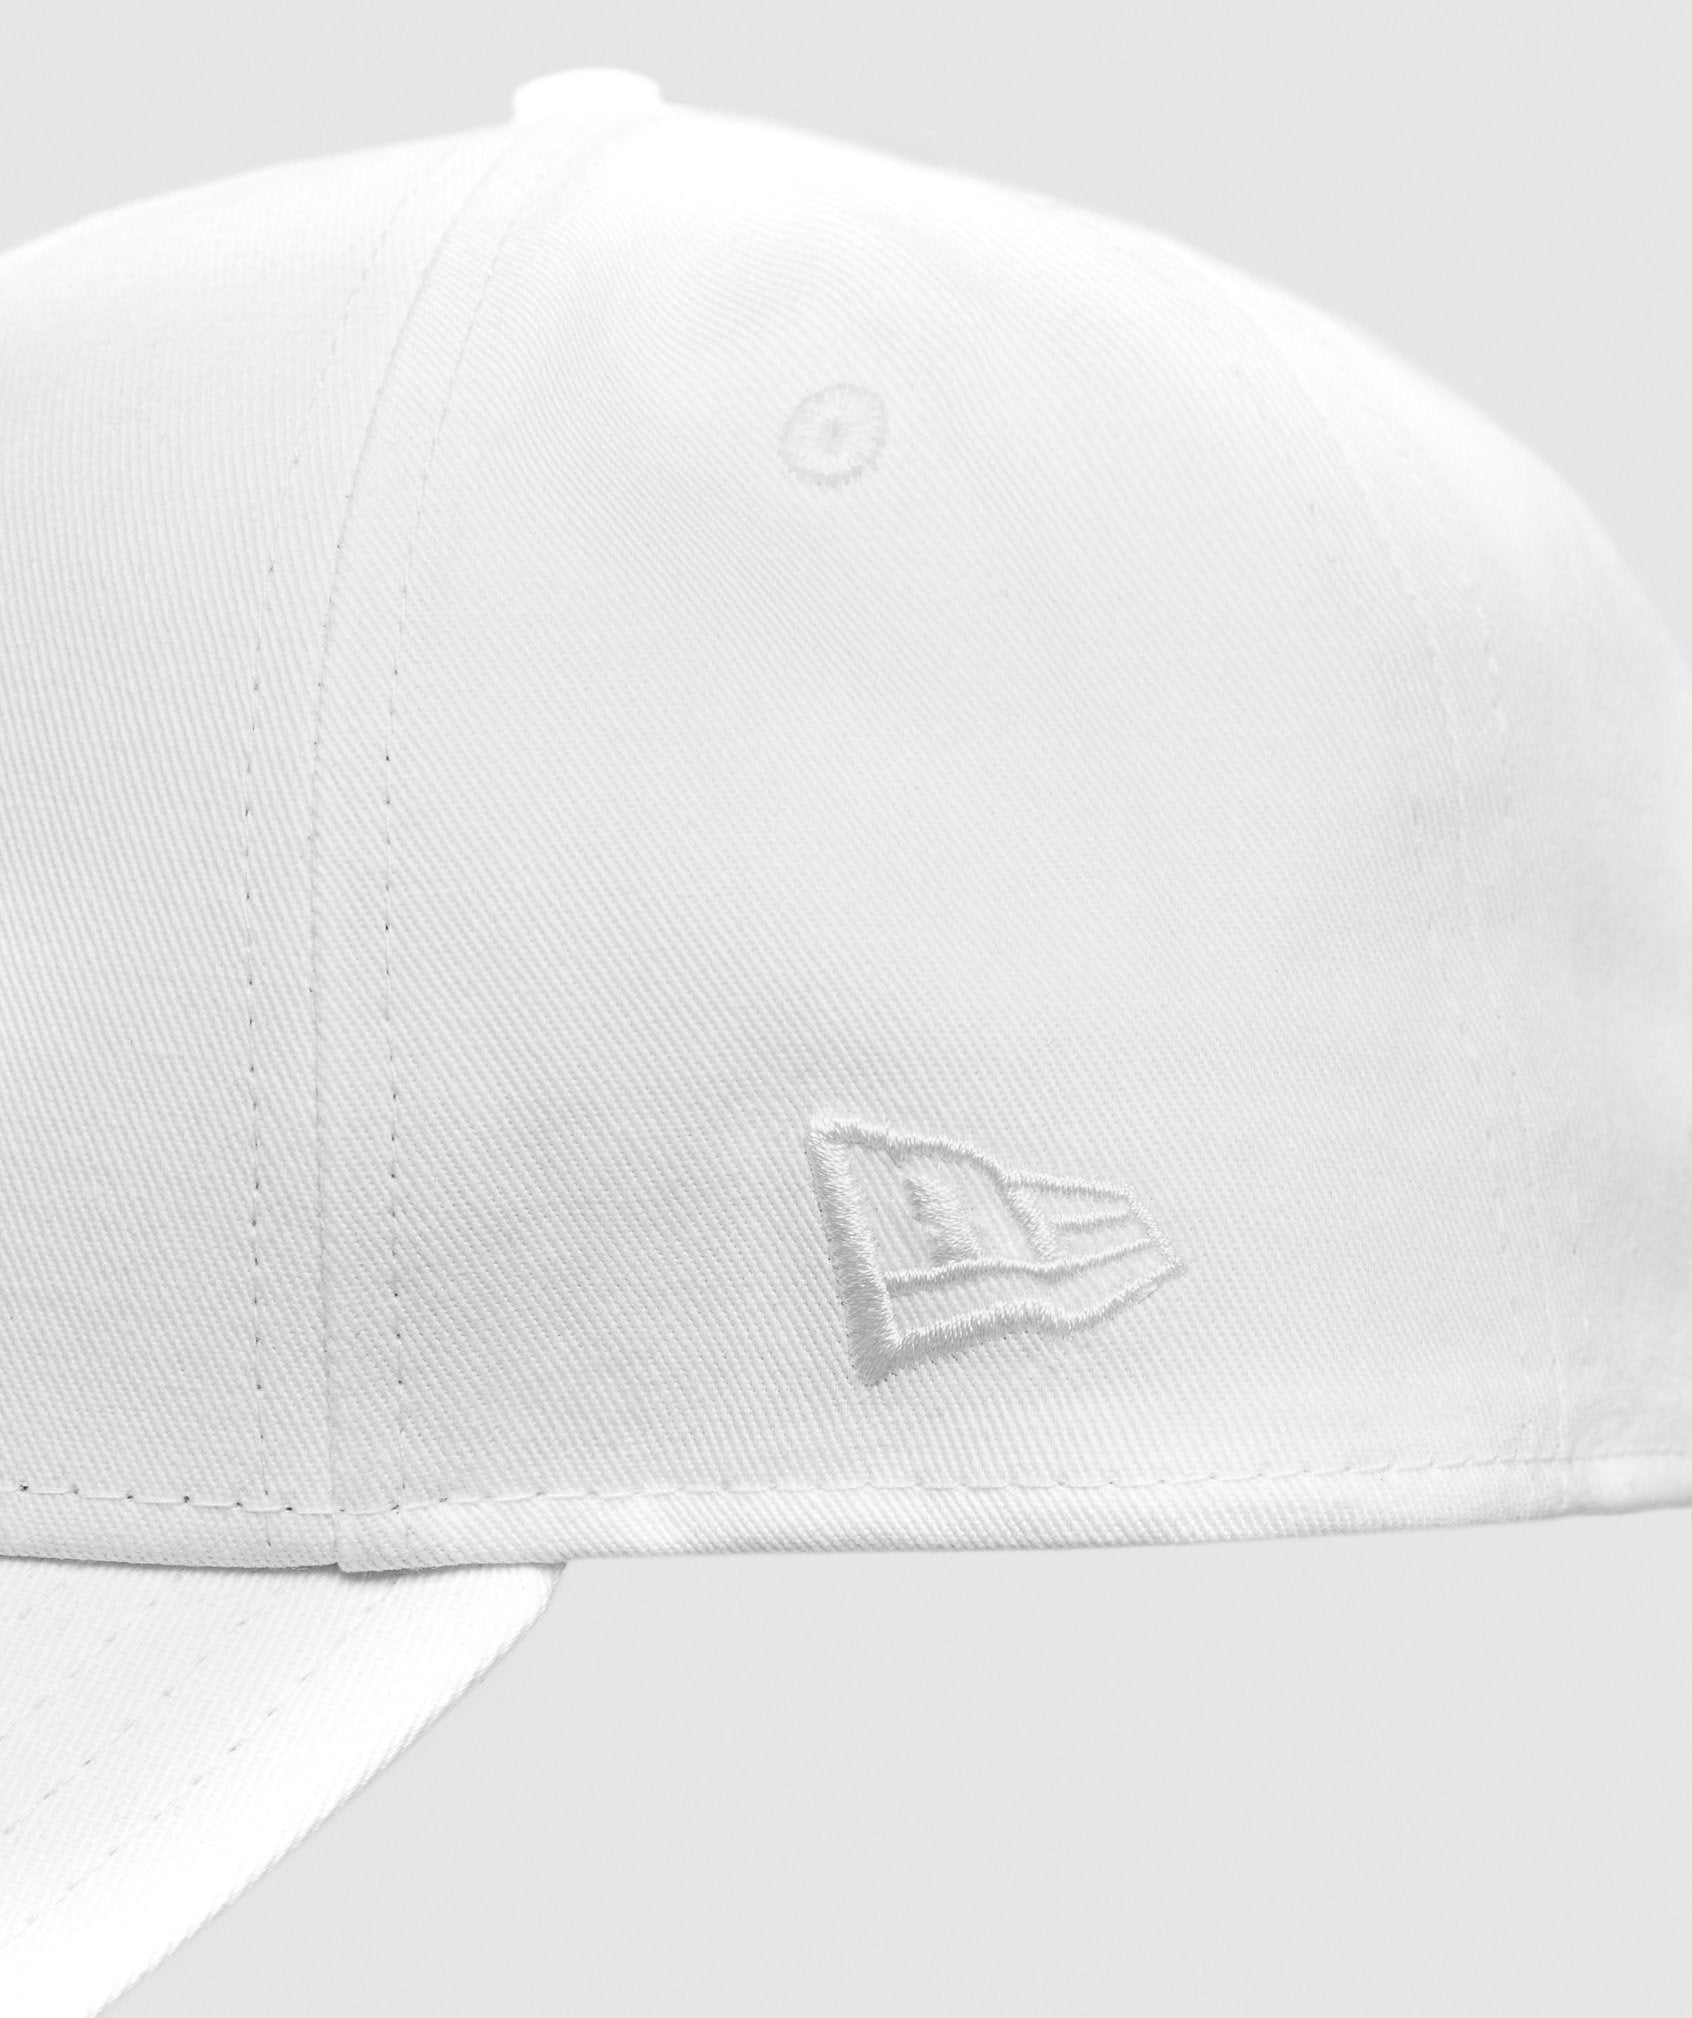 New Era 9FORTY Adjustable in White - view 4